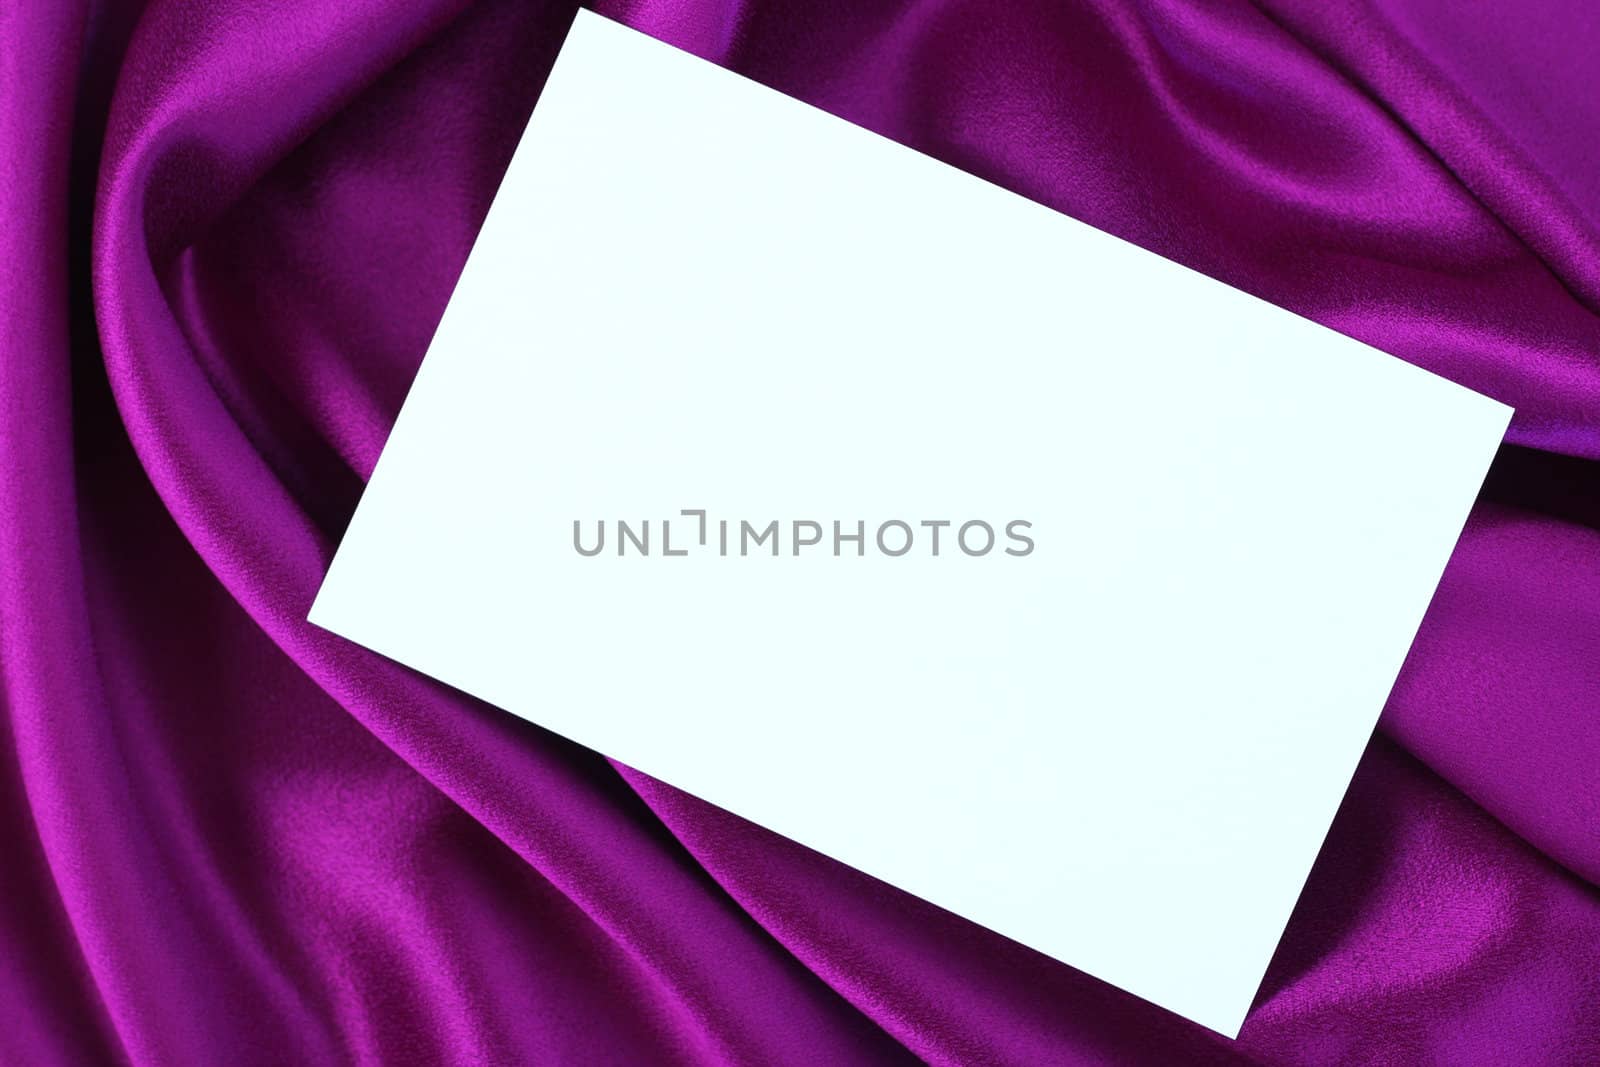 Blank white card on purple and magenta colored satin cloth.